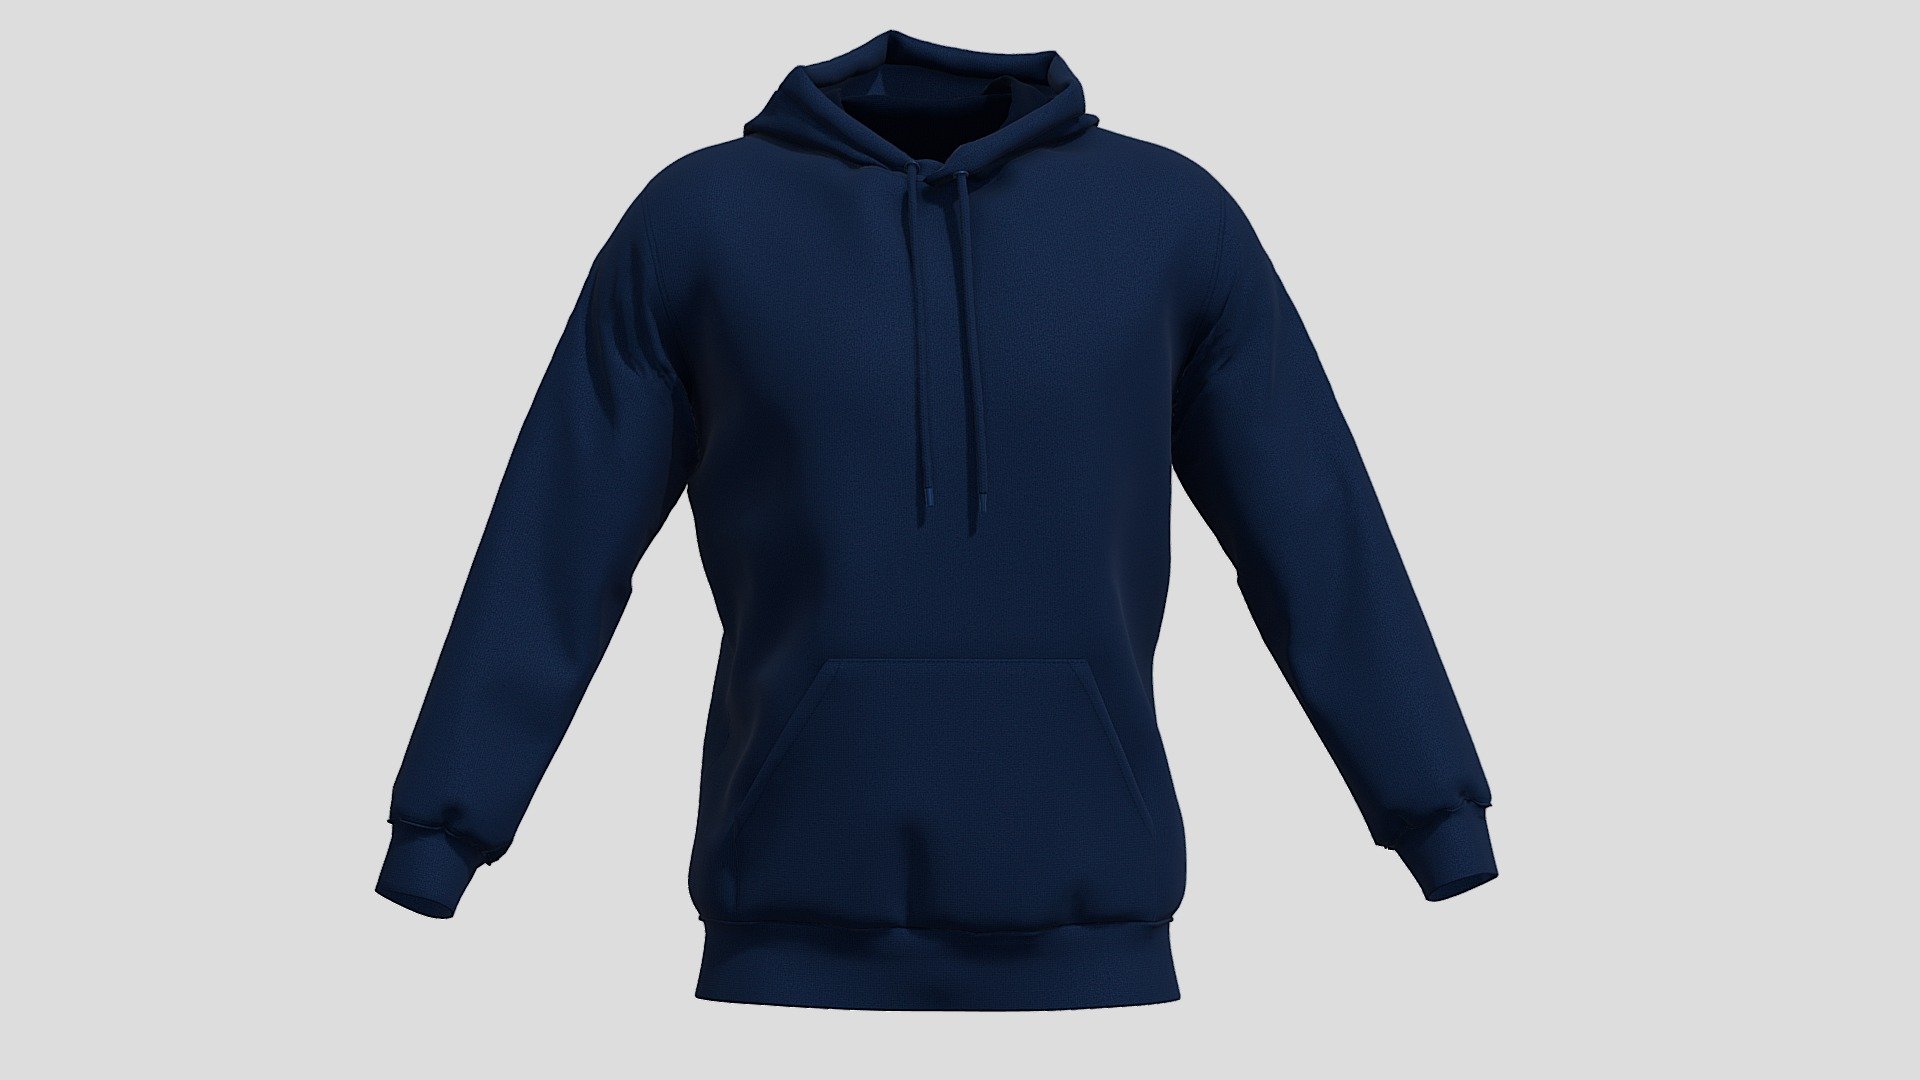 Hi, I'm Frezzy. I am leader of Cgivn studio. We are a team of talented artists working together since 2013.
If you want hire me to do 3d model please touch me at:cgivn.studio Thanks you! - Hoodie Navy Blue PBR Realistic - Buy Royalty Free 3D model by Frezzy (@frezzy3d) 3d model